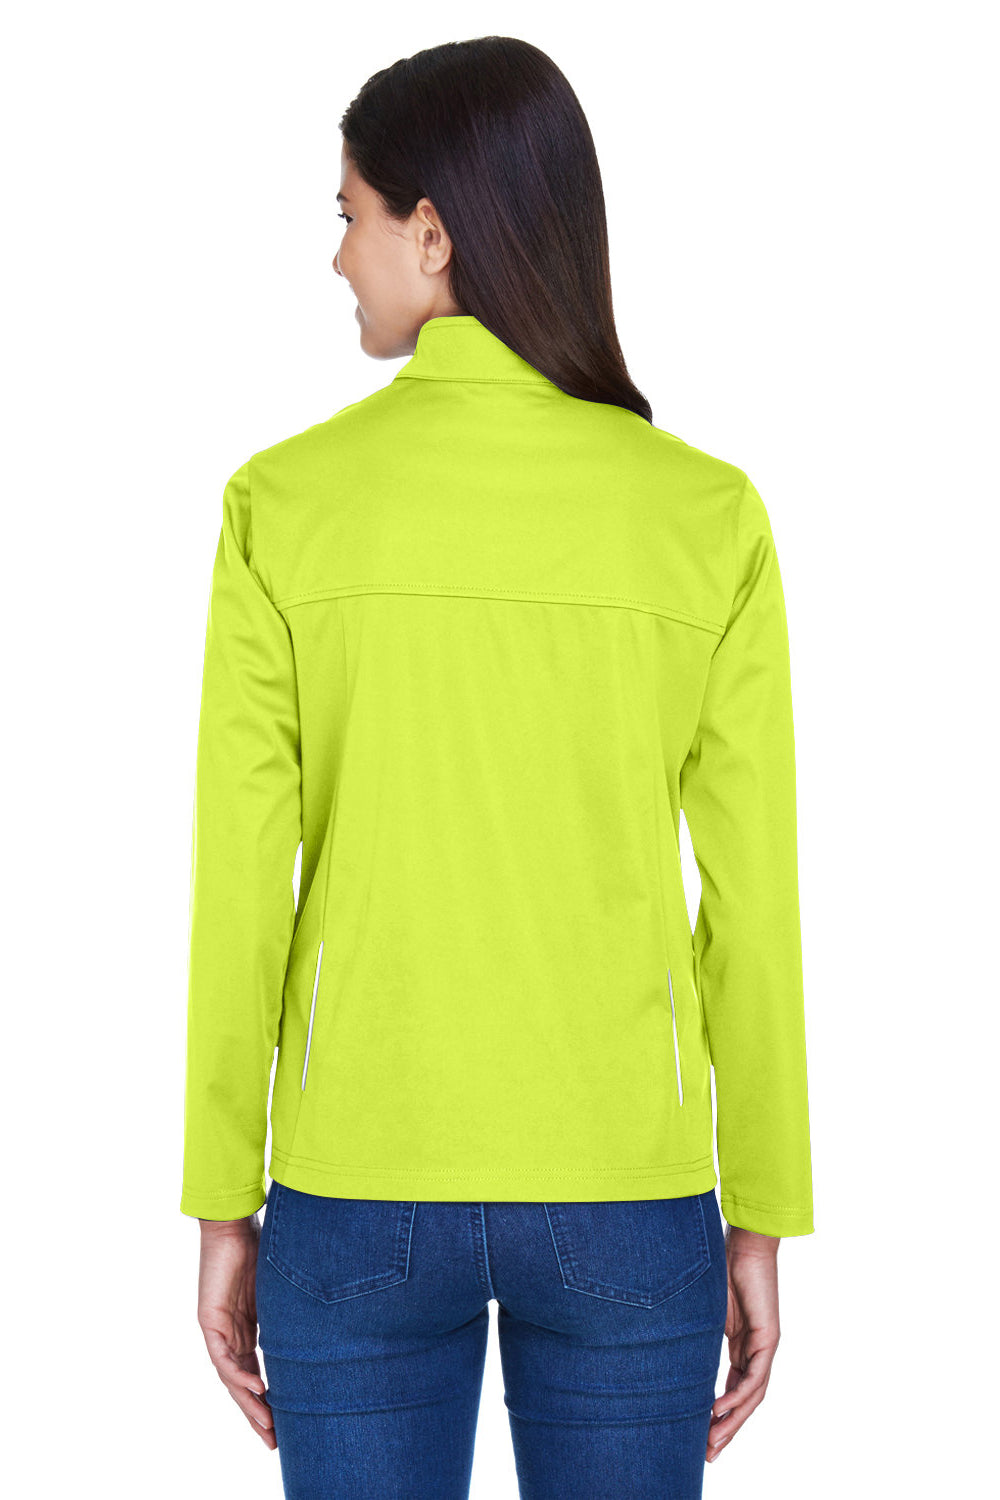 Core 365 CE708W Womens Techno Lite Water Resistant Full Zip Jacket Safety Yellow Back